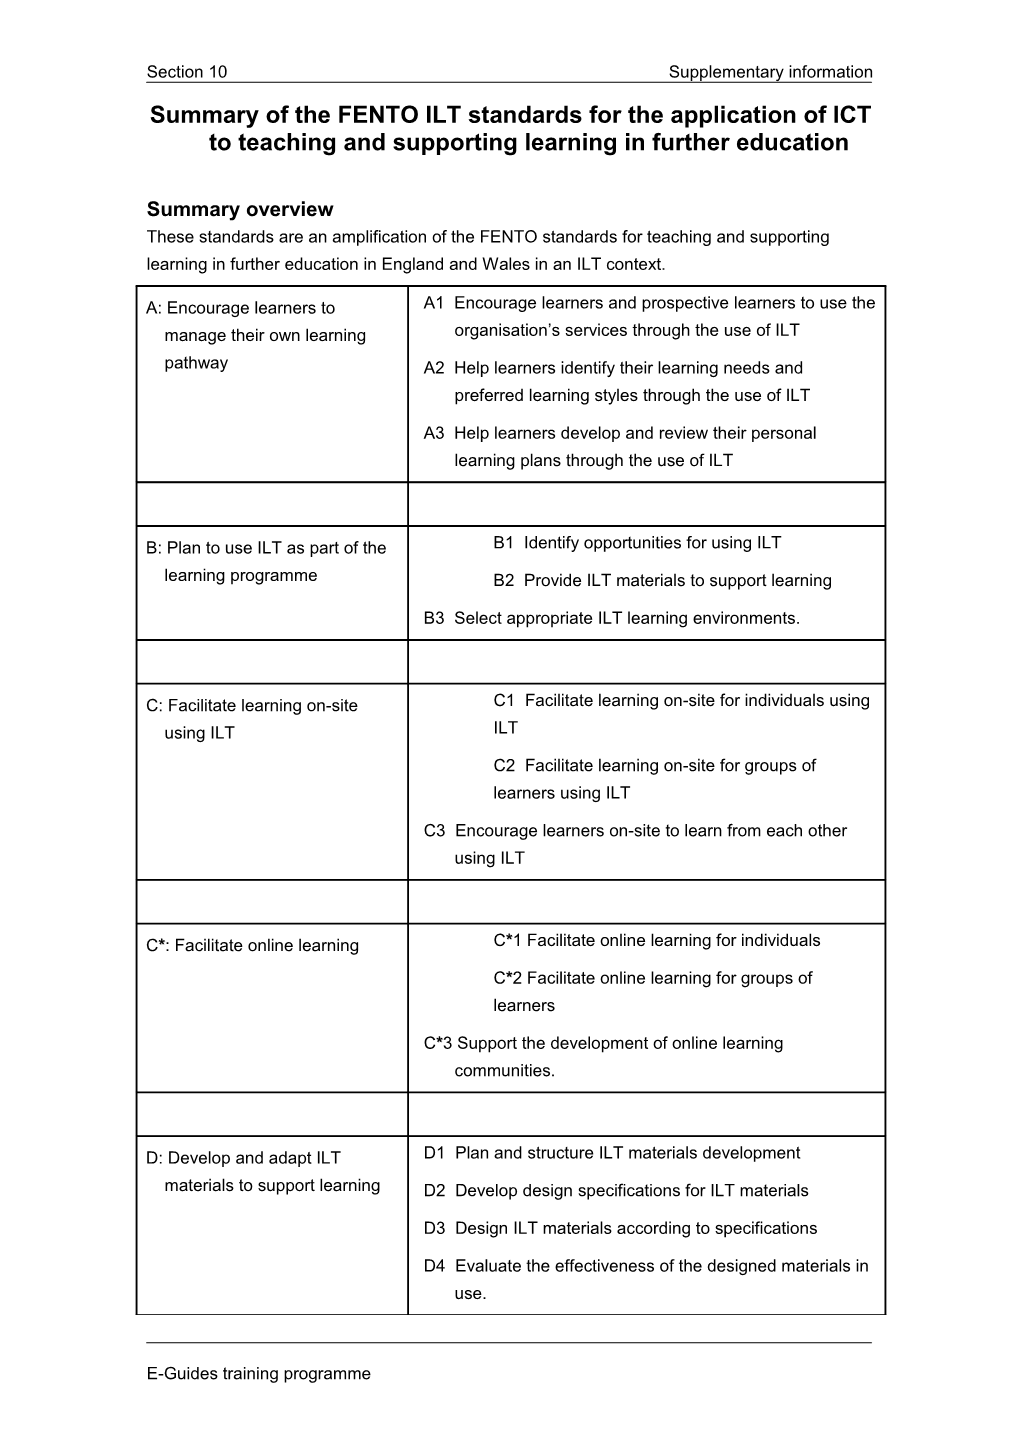 Summary of the FENTO ILT Standards for the Application of ICT to Teaching and Supporting